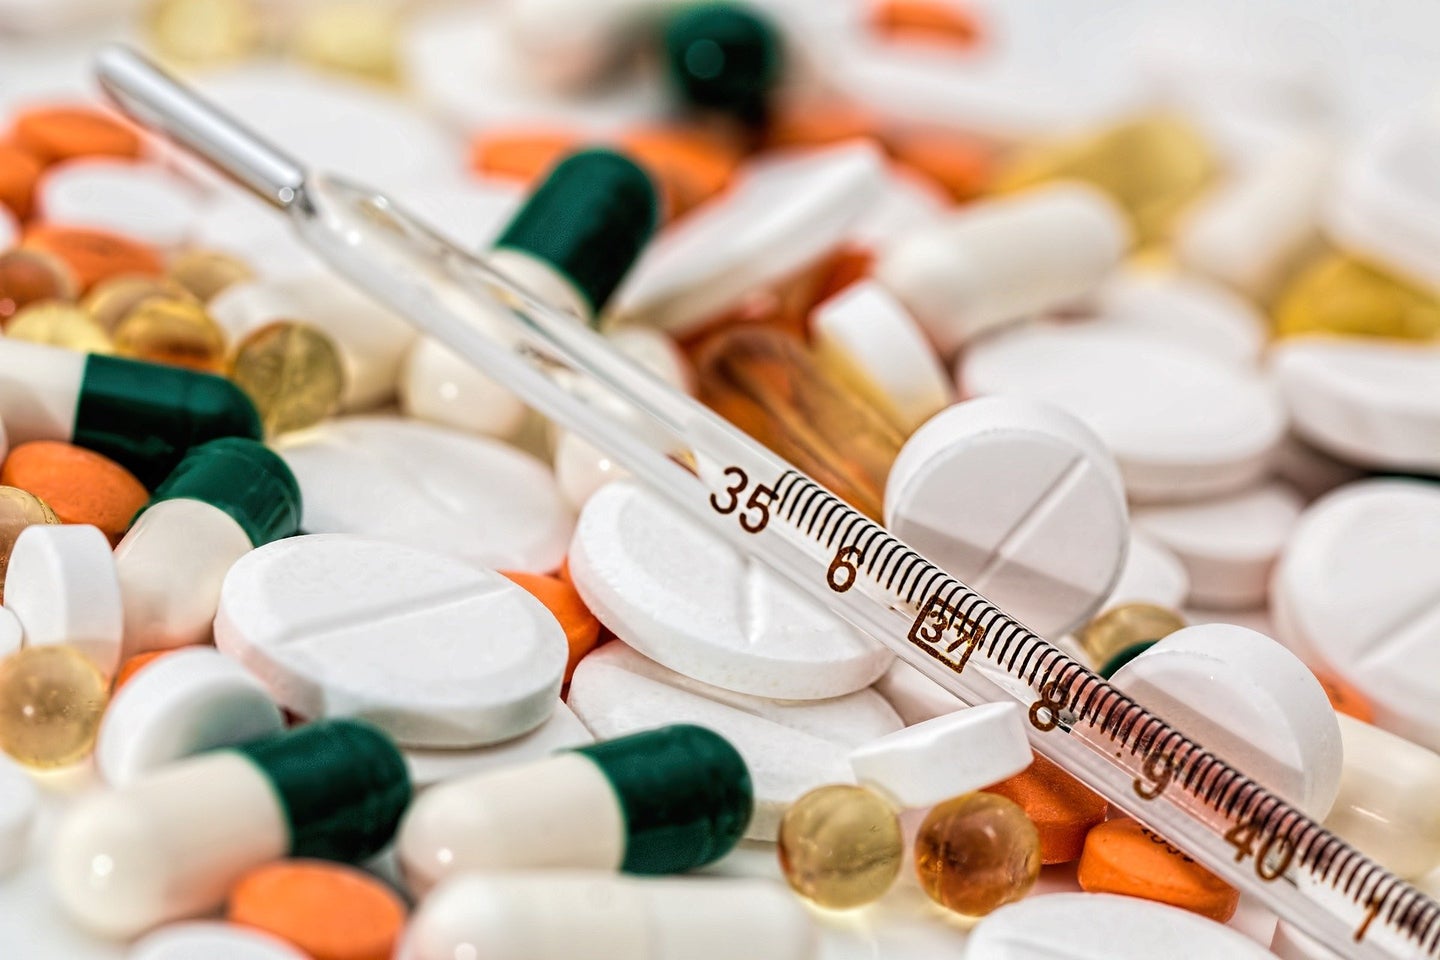 Green, white, and orange pills & thermometer to symbolize COVID-19 symptoms and treatments